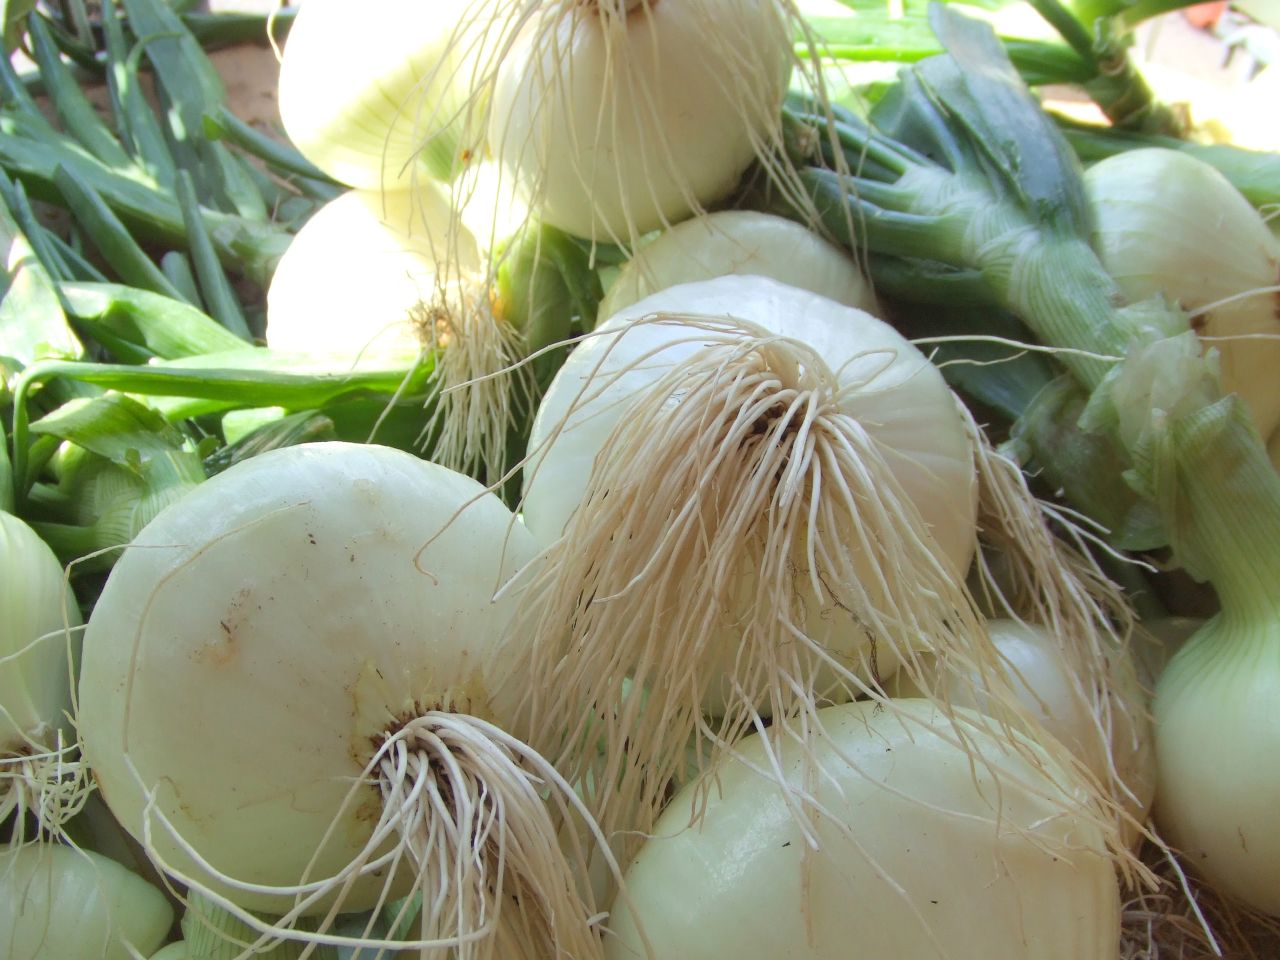 closeup of some onions and other green vegetables